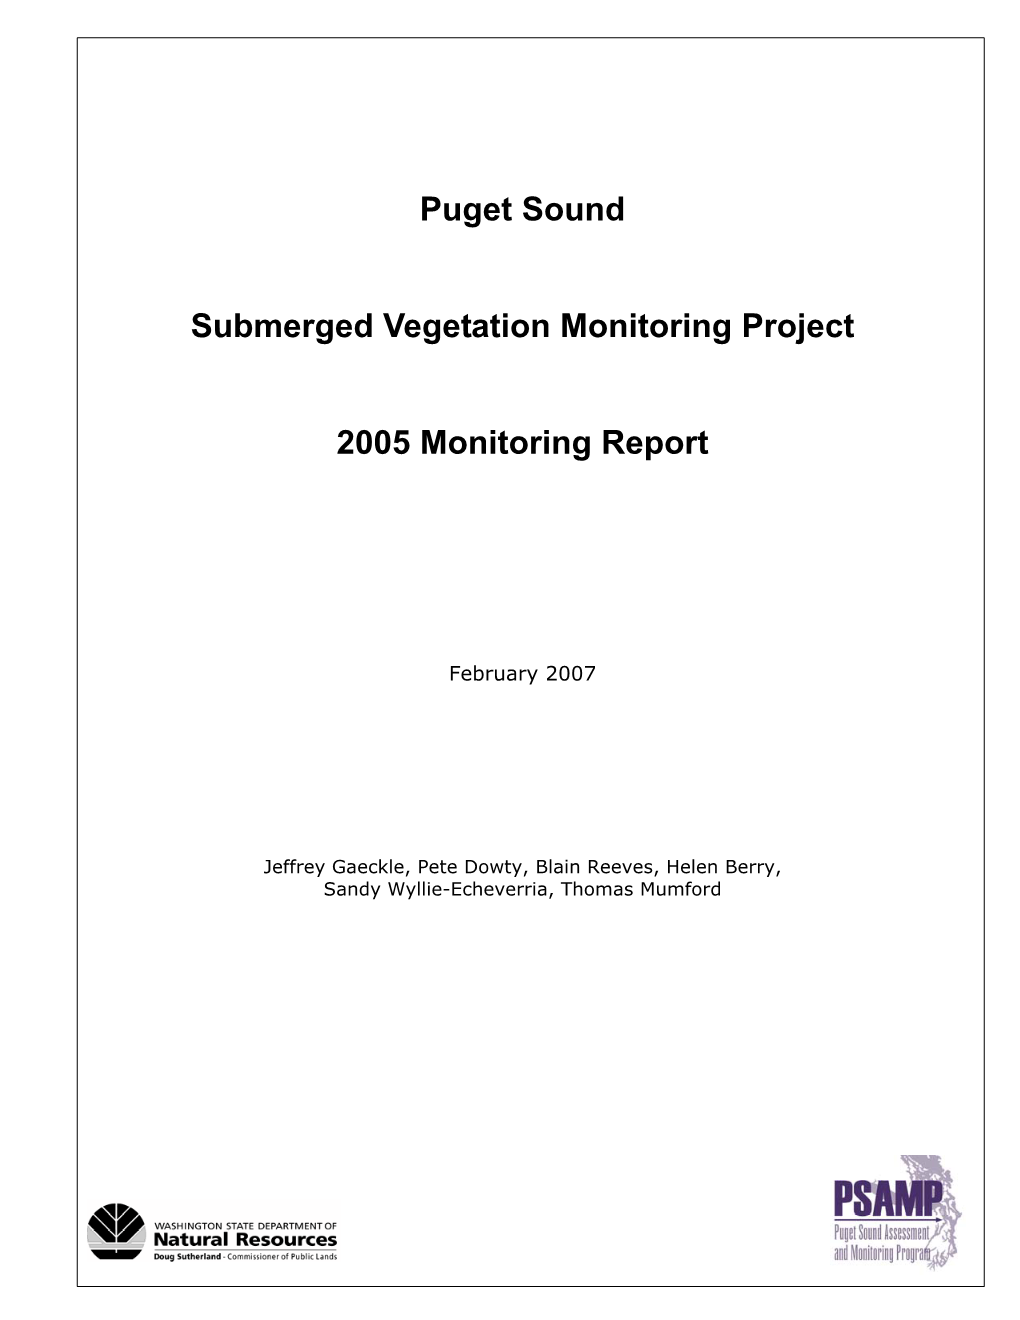 Puget Sound Submerged Vegetation Monitoring Project: 2000-2002 Monitoring Report